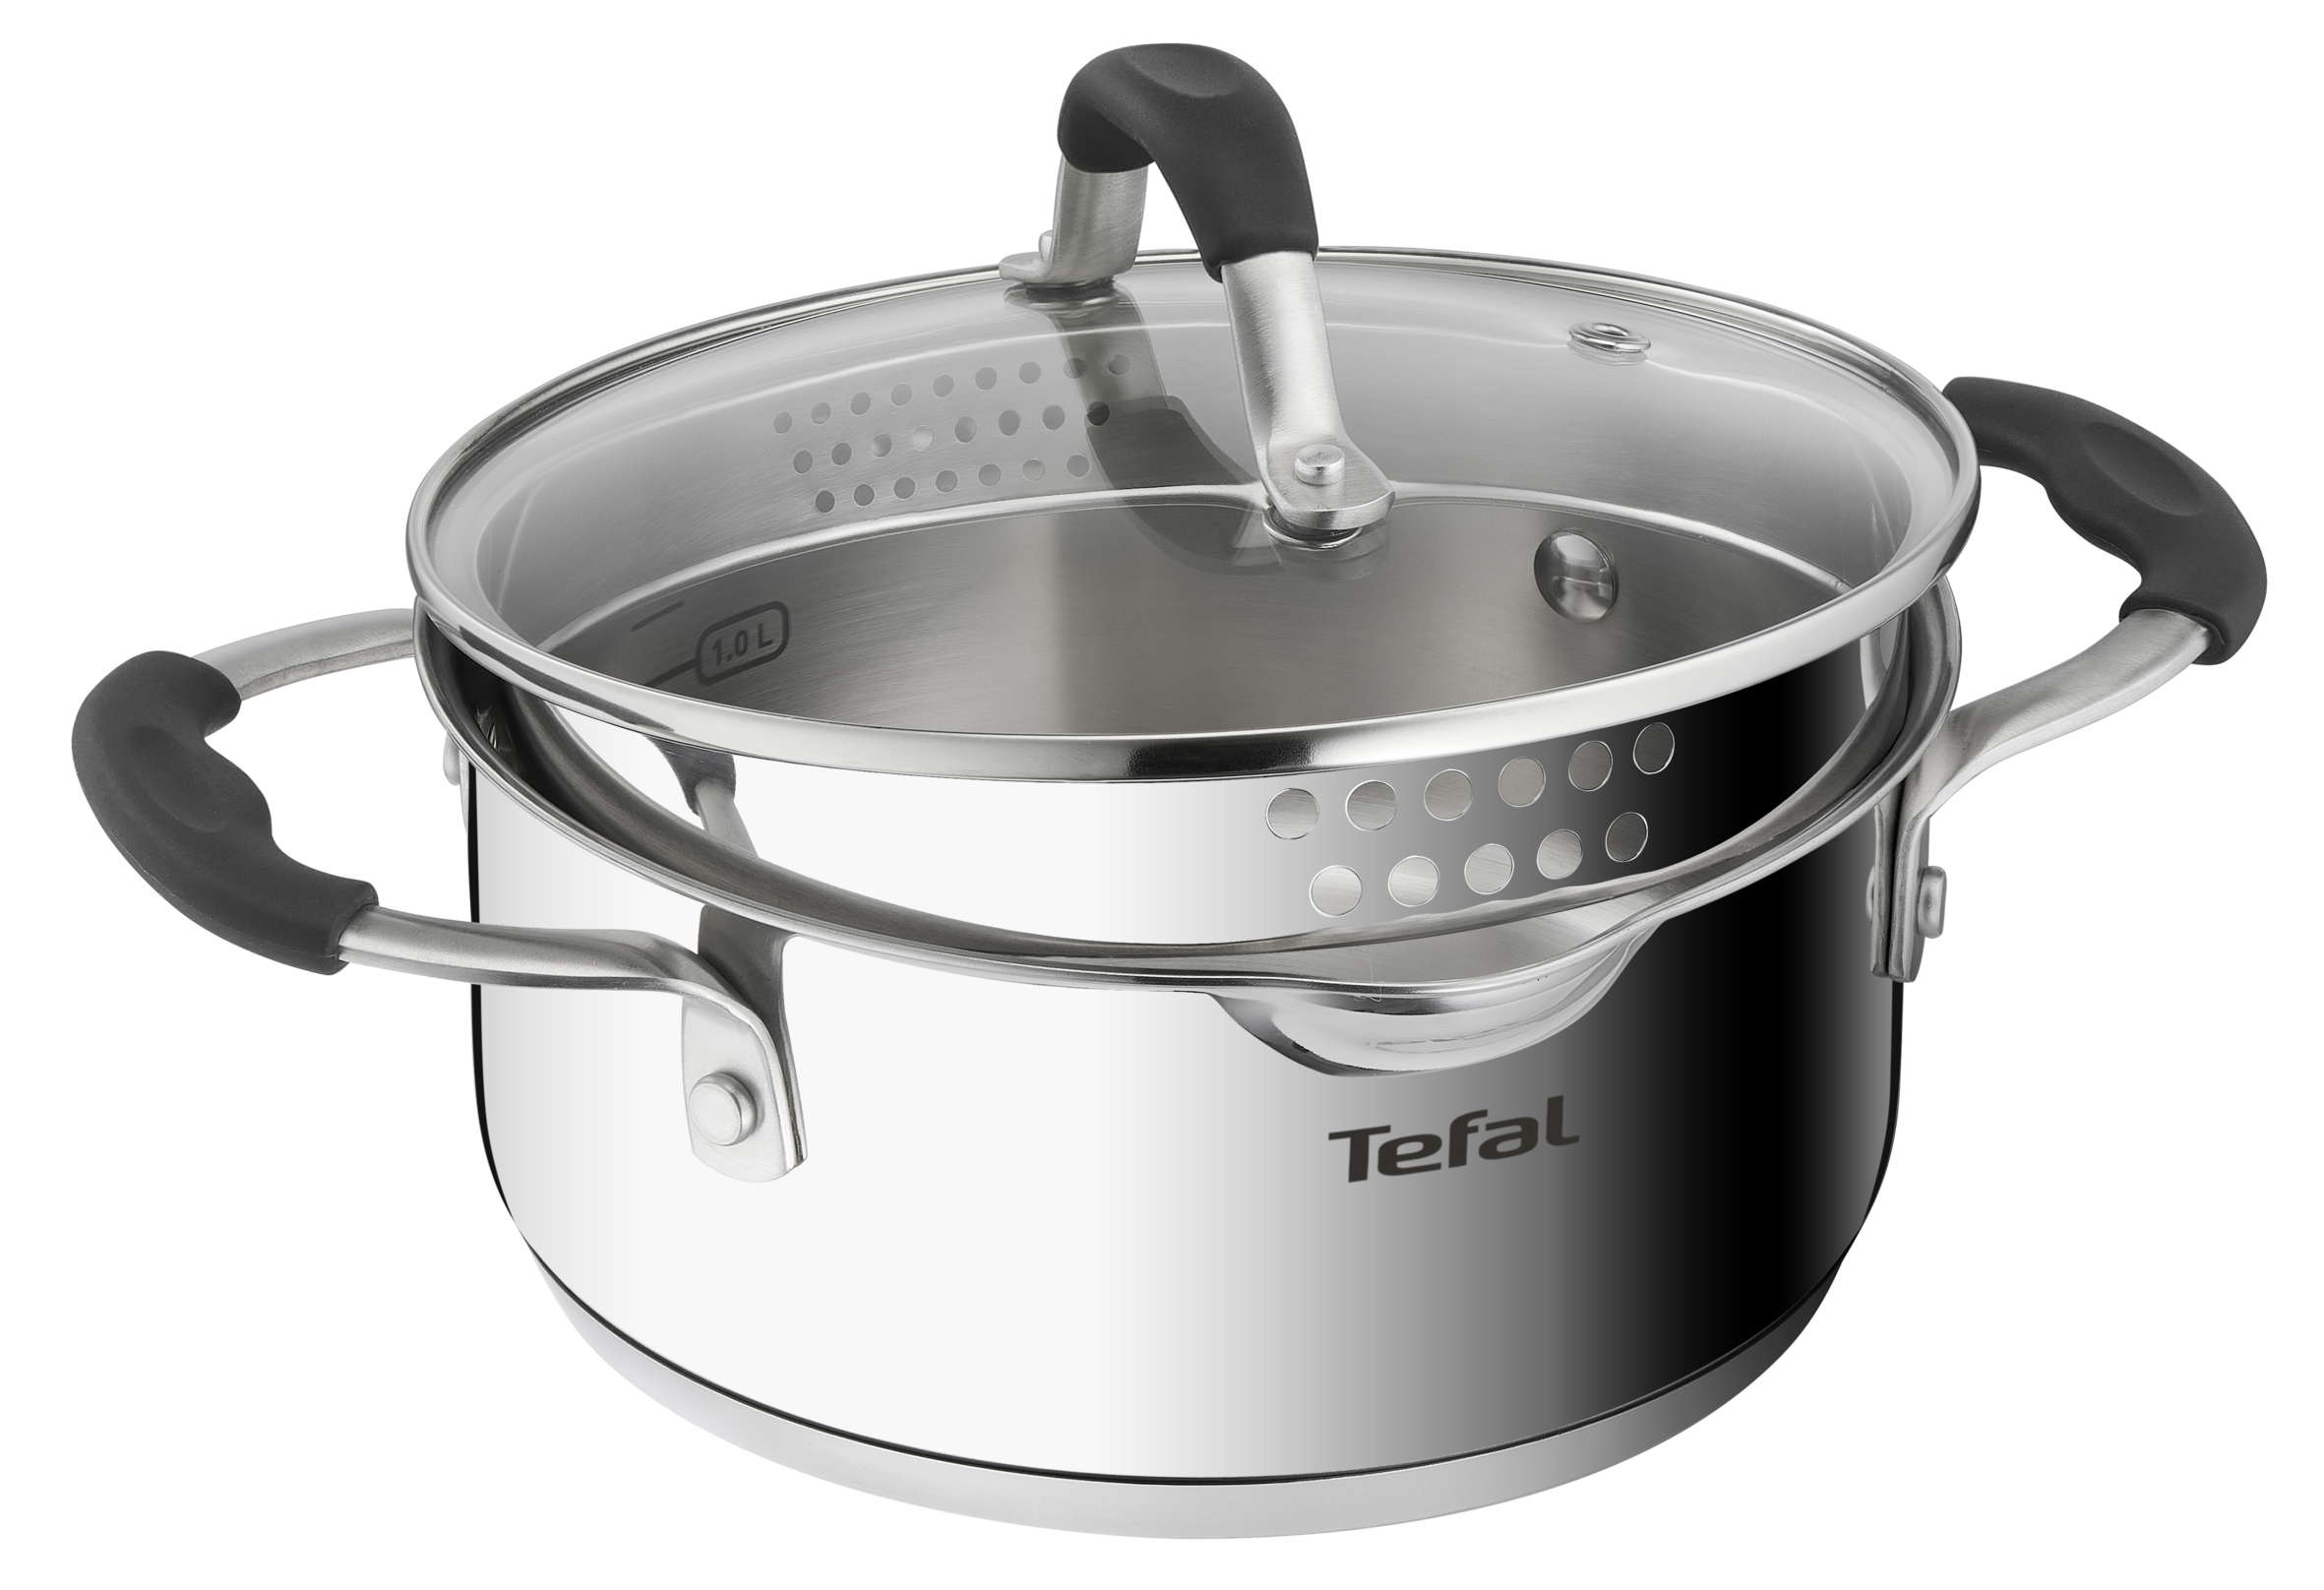 Tefal Illico Induction Stainless Steel 4pce Set + Utensils